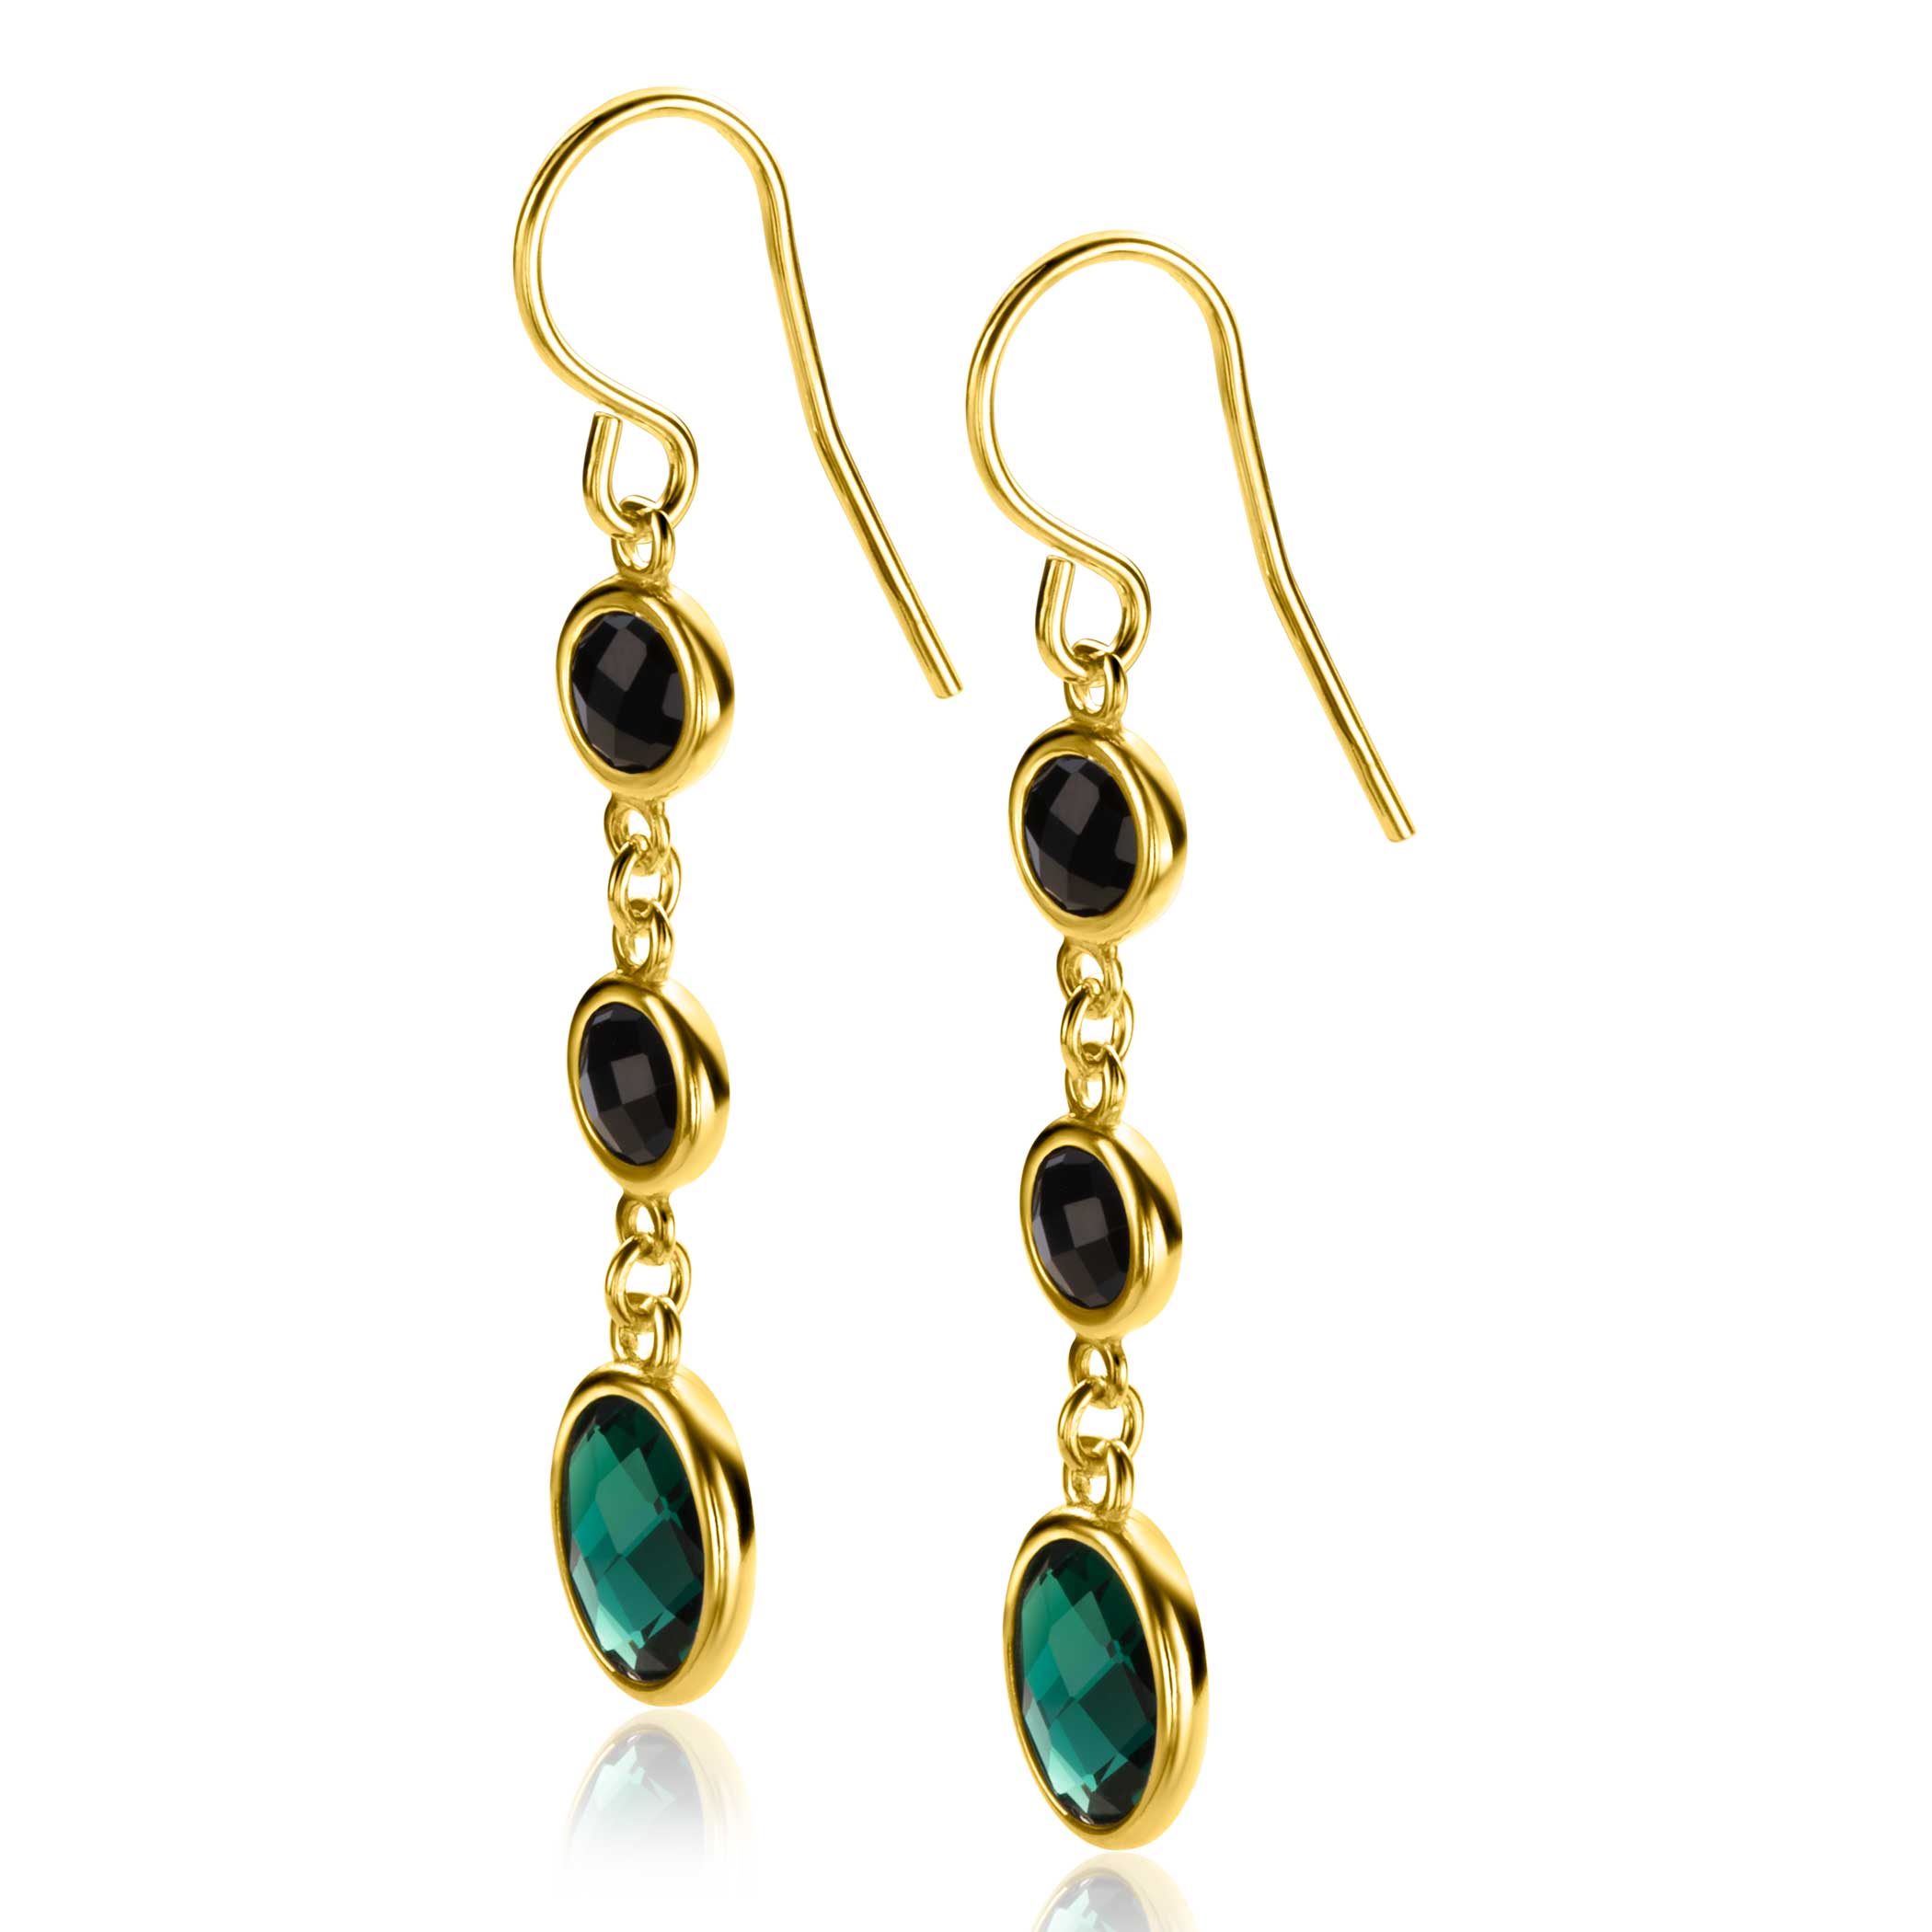 50mm ZINZI Gold Plated Sterling Silver Long Drop Earrings Set with 2 Round Black Zirconias and a Larger Oval Green Color Stone ZIO2389